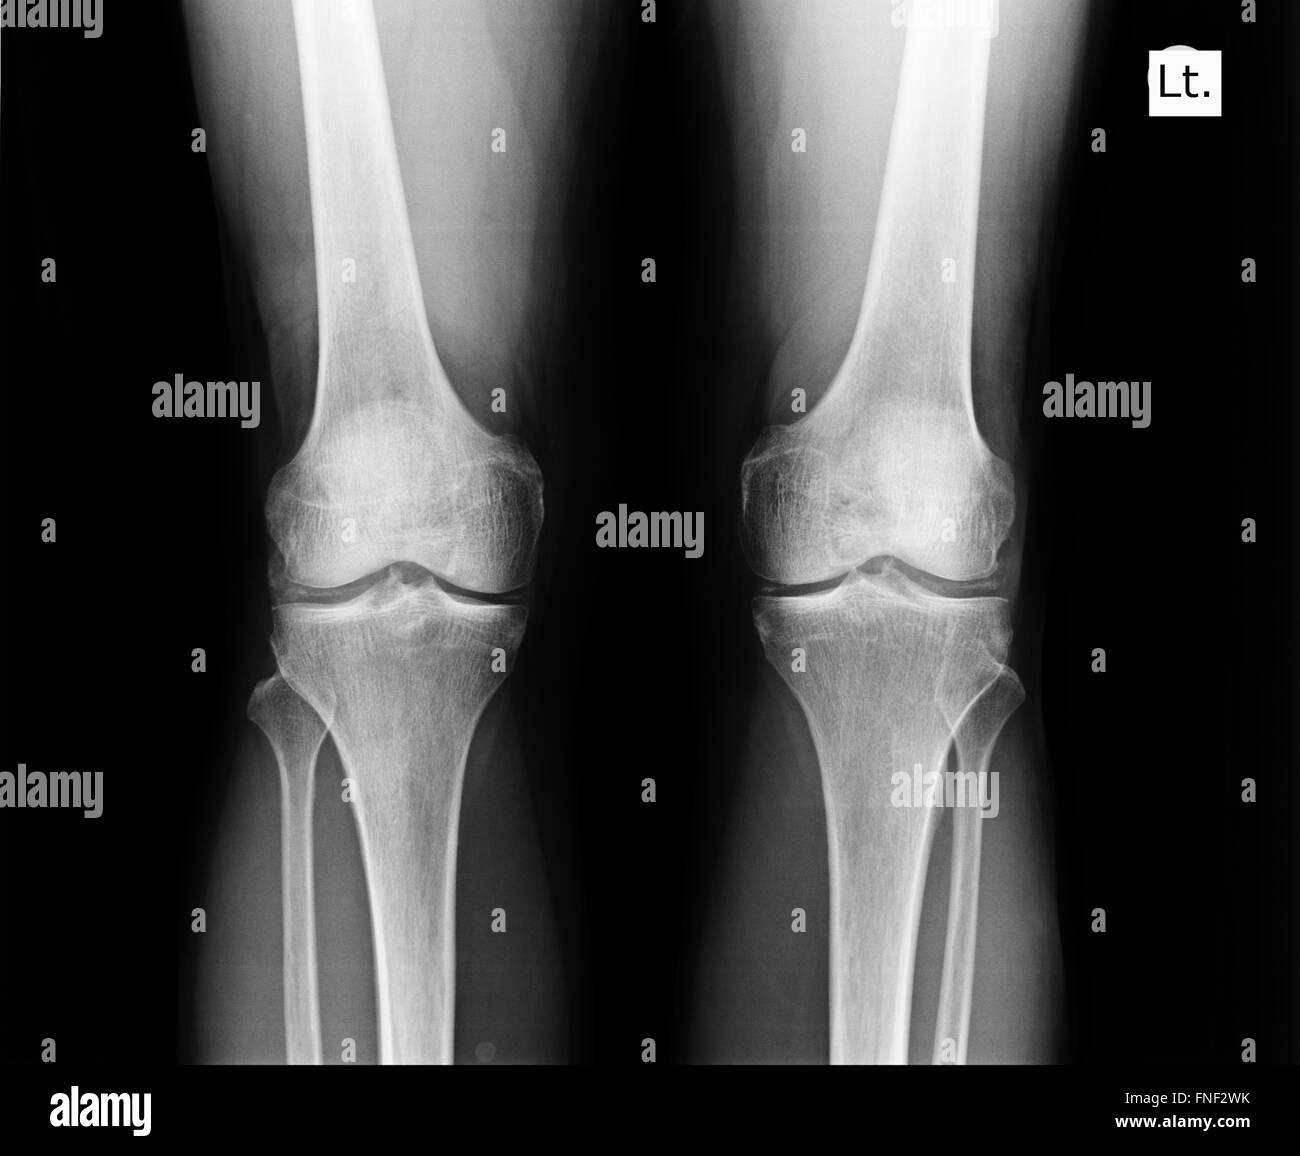 knee with total replacement x-ray image on black background Stock Photo